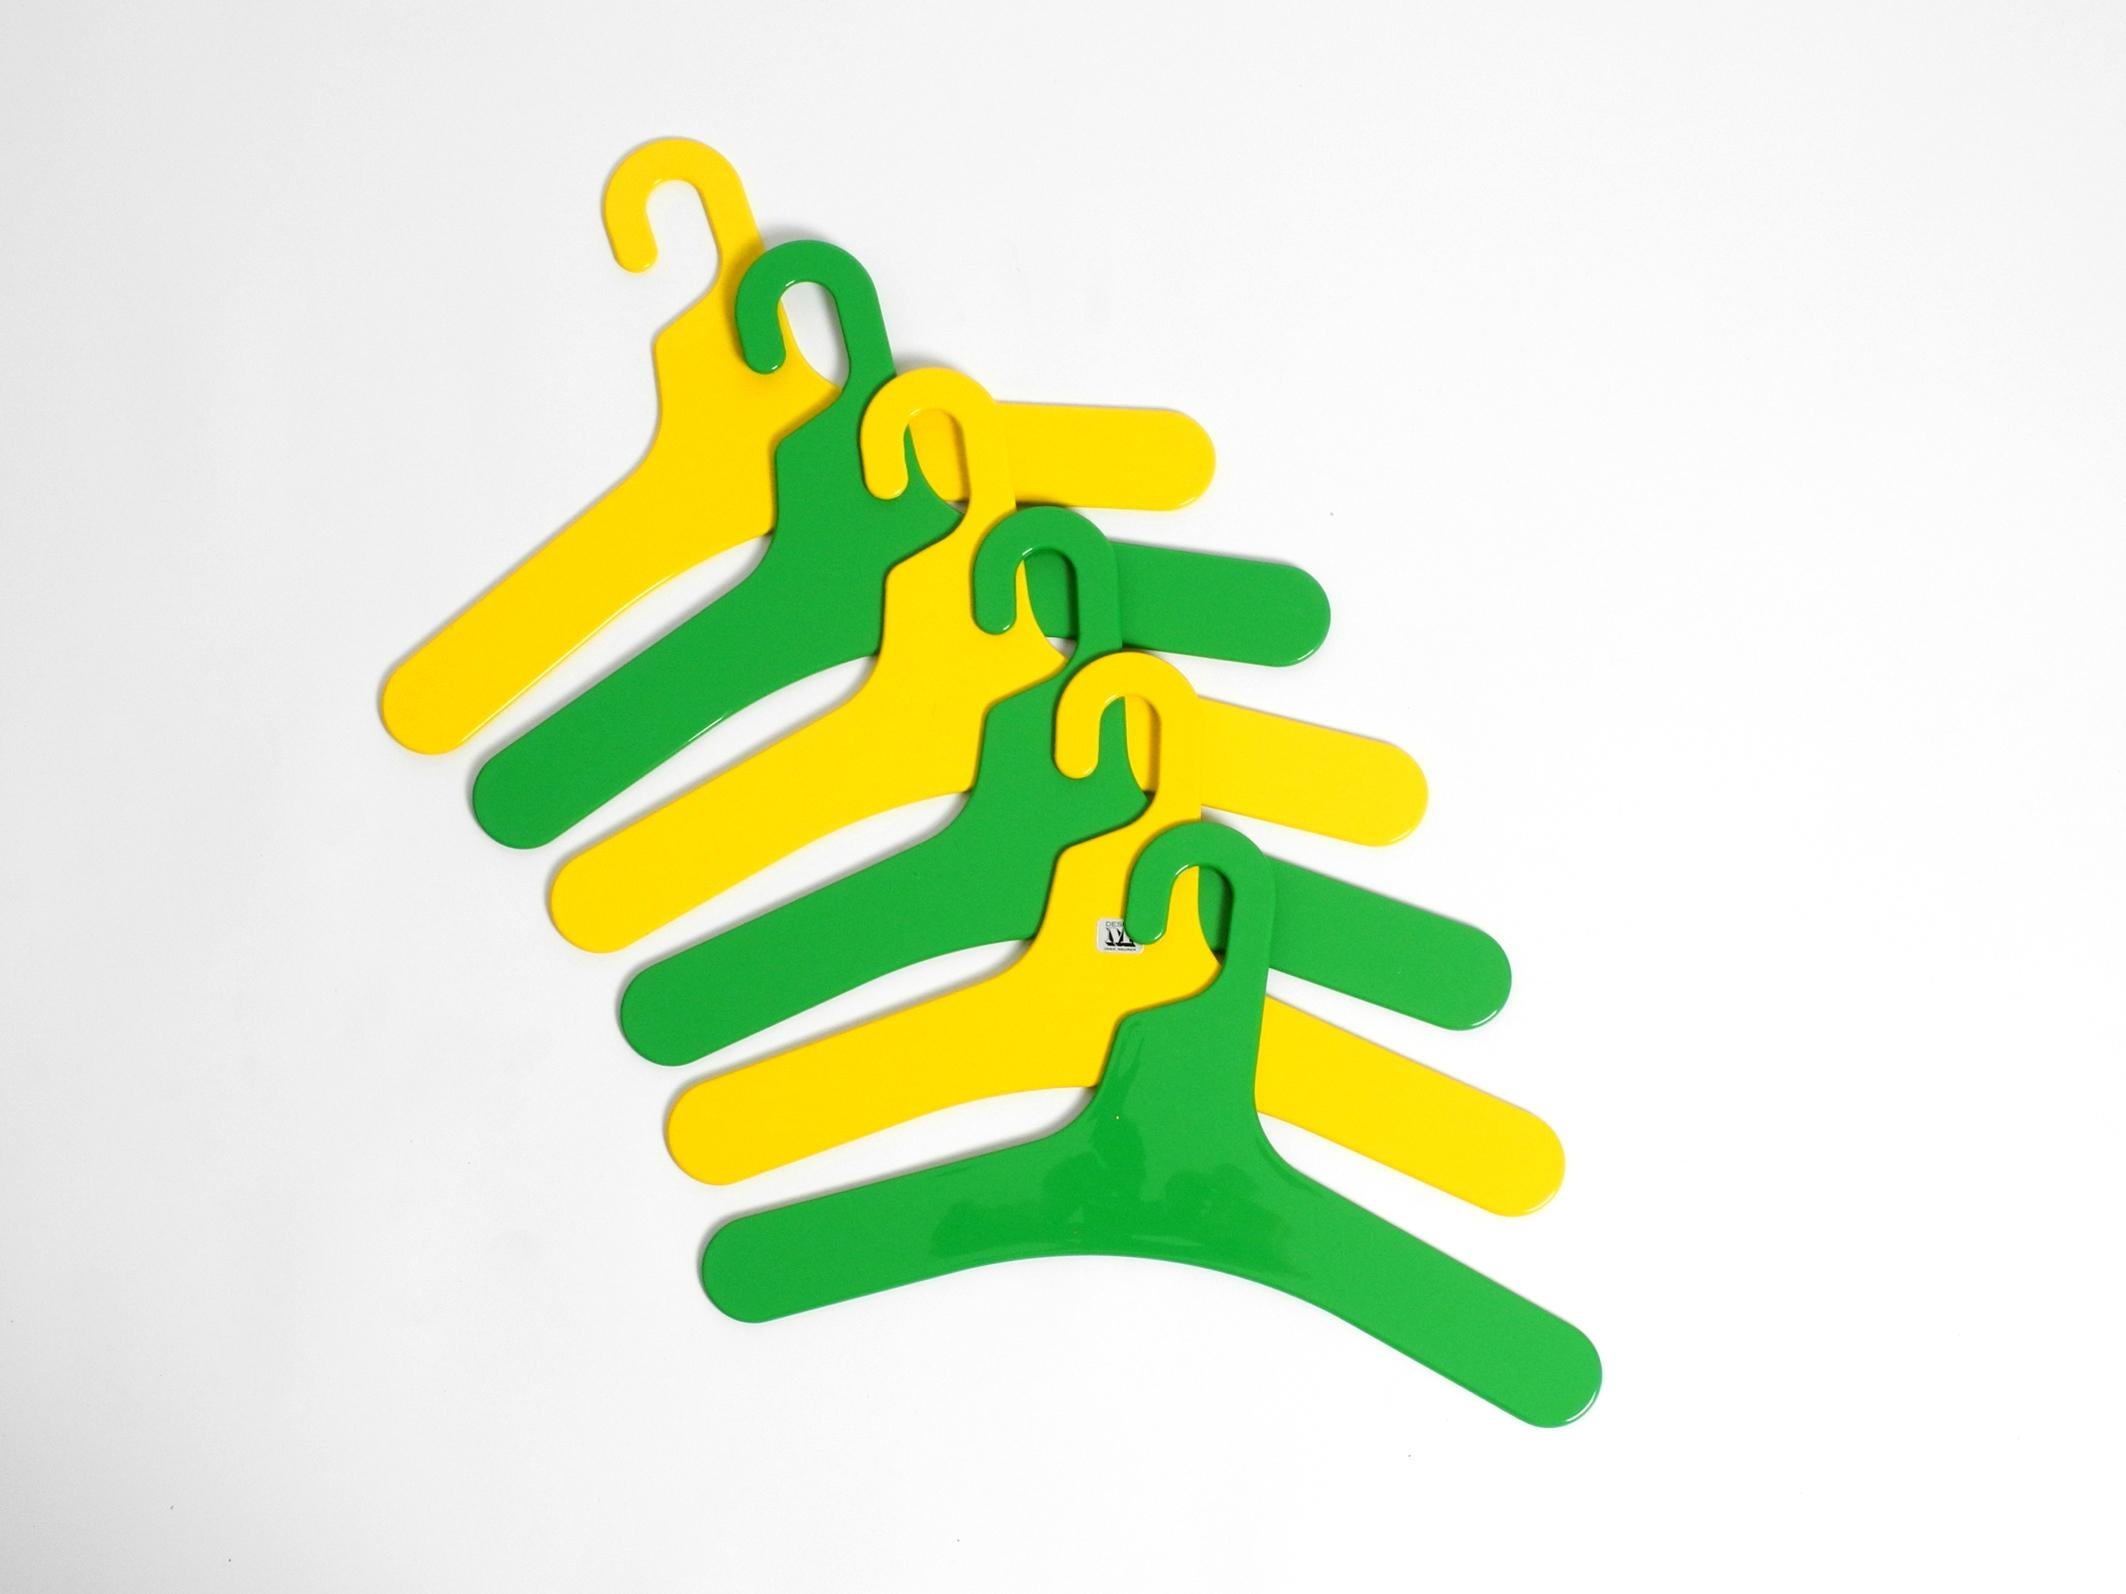 Space Age 6 unused 1970s yellow and green plastic hangers by Ingo Maurer for Design M